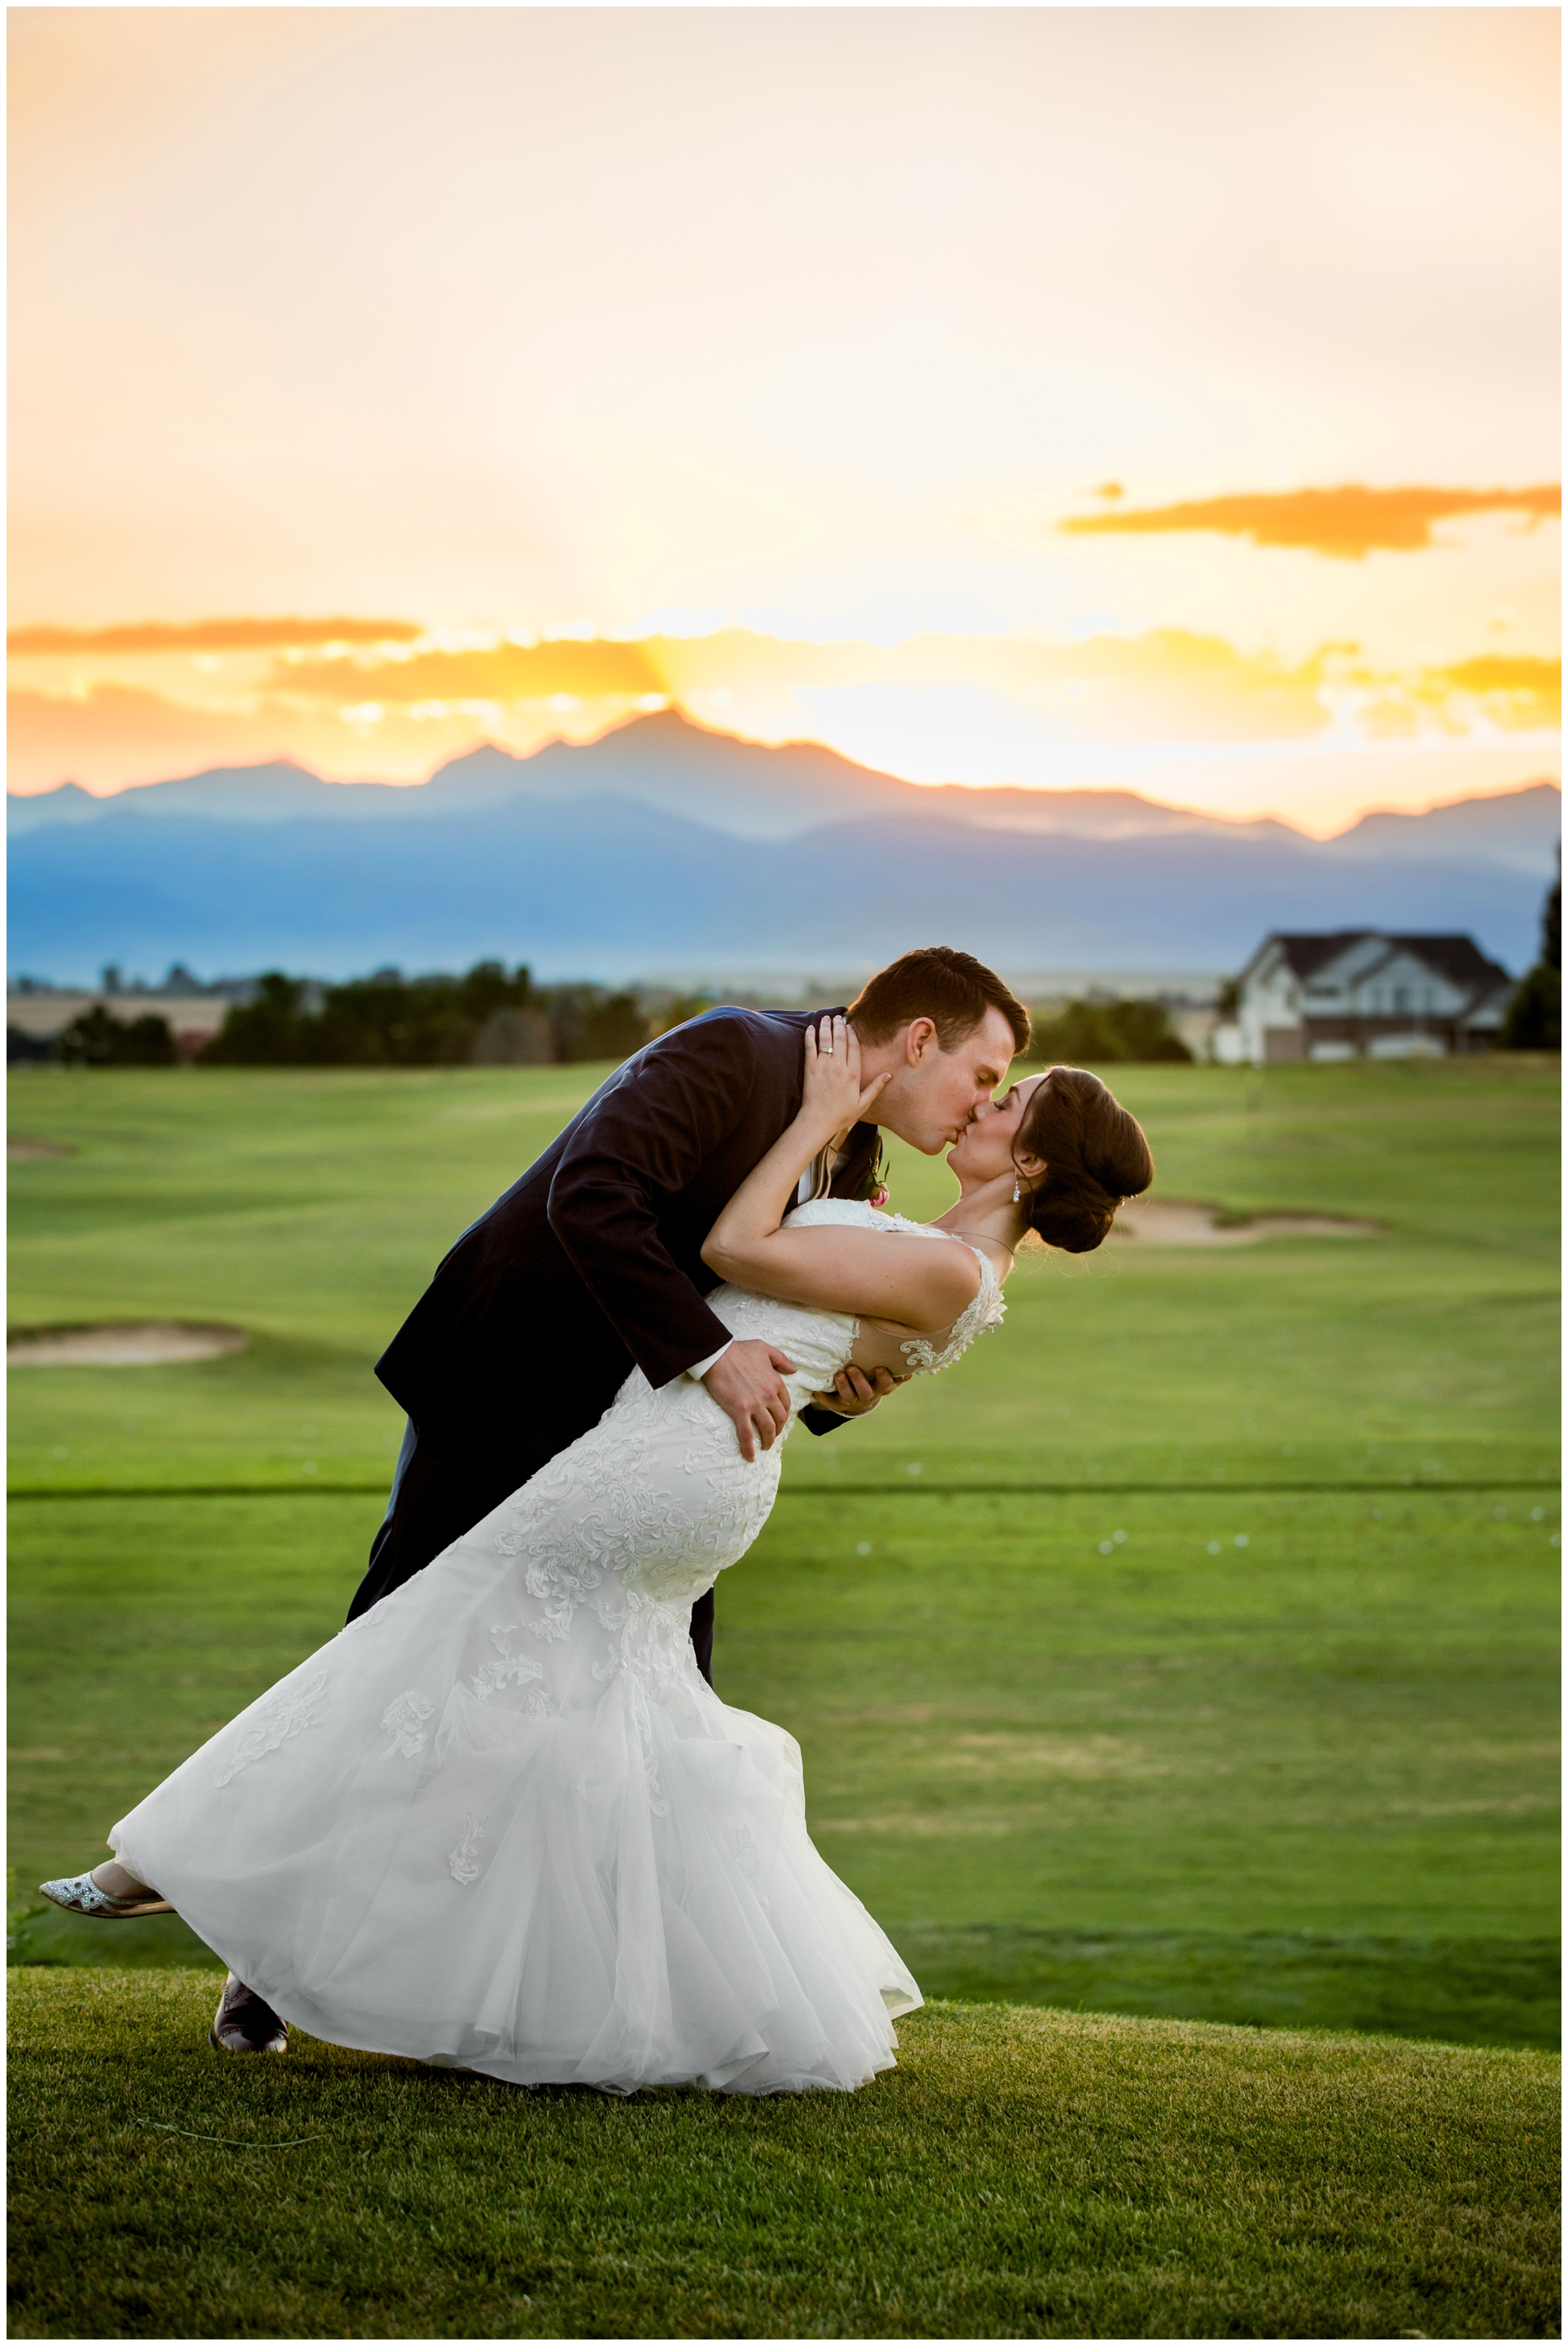 couple kissing with mountains and sunset in background during Denver Colorado golf course wedding photography session